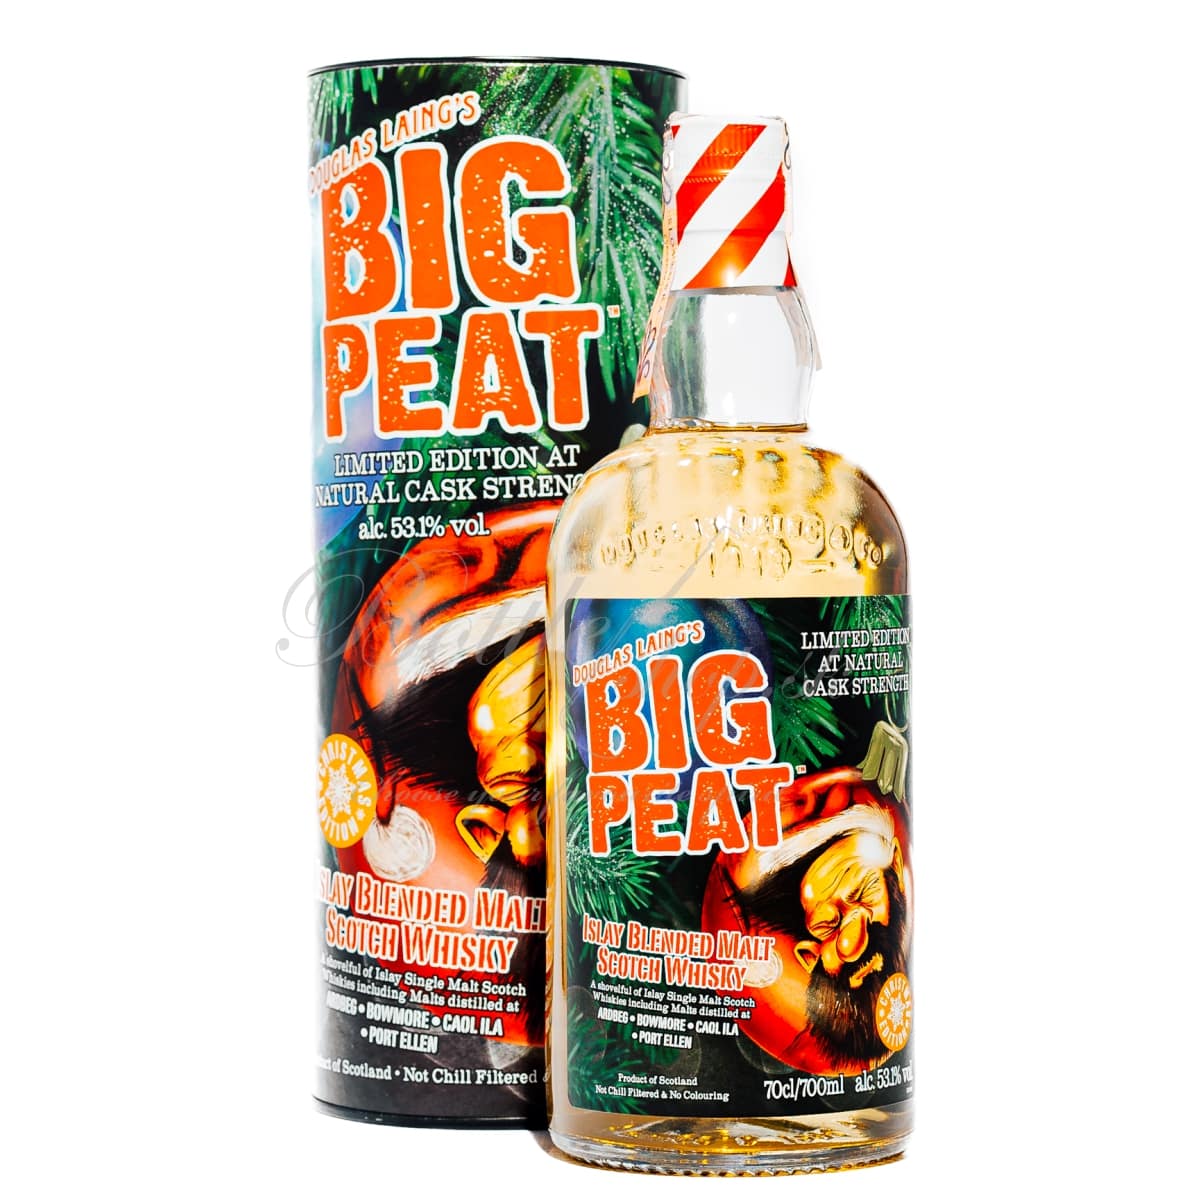 Douglas Laing Old Big Peat Christmas Limited Edition 2020 Blended